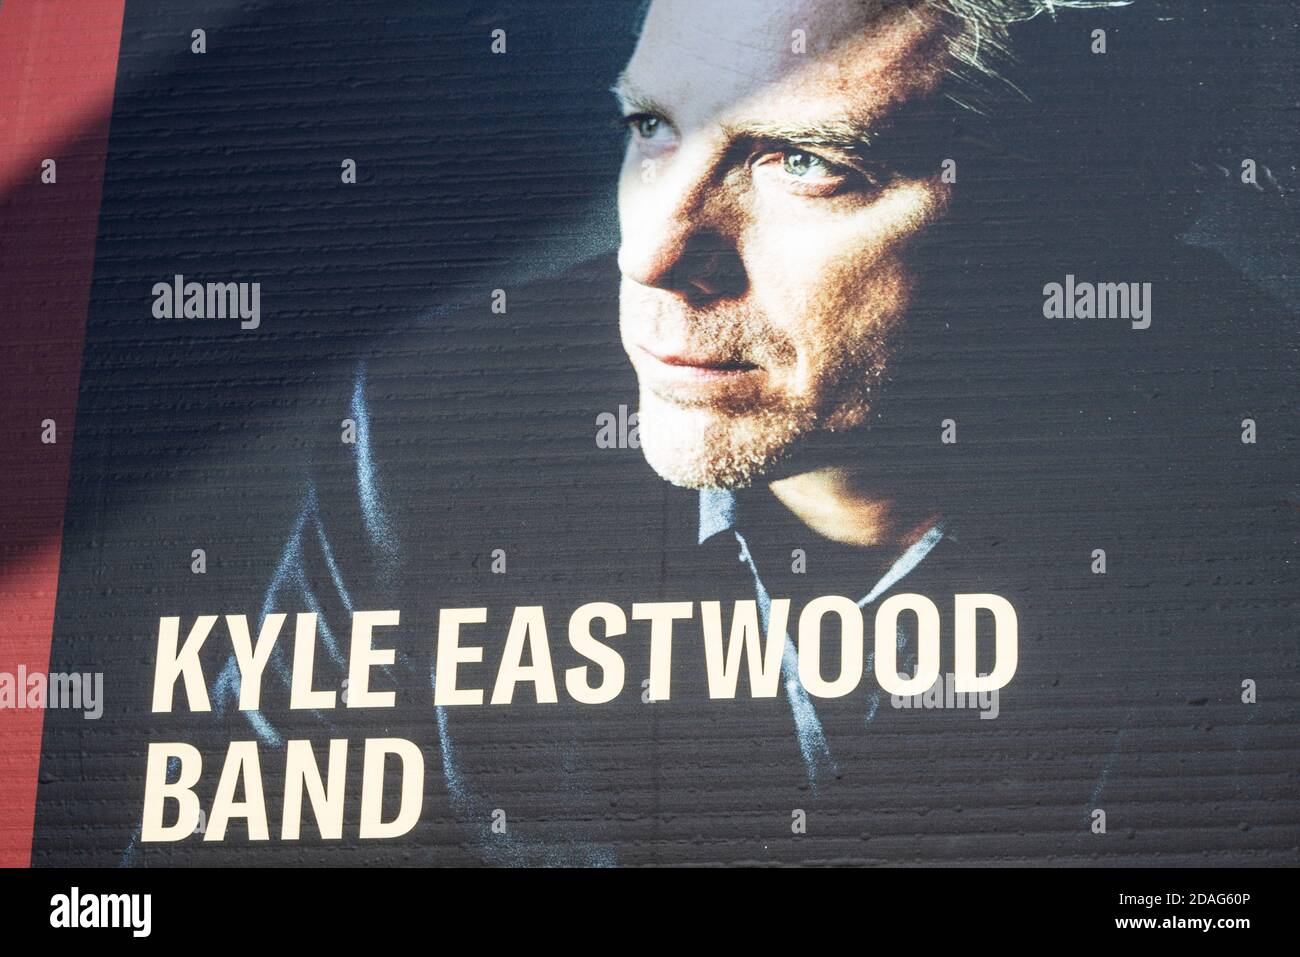 Kyle Eastwood in Spagna. ( Figlio di Clint Eastwood ). Foto Stock